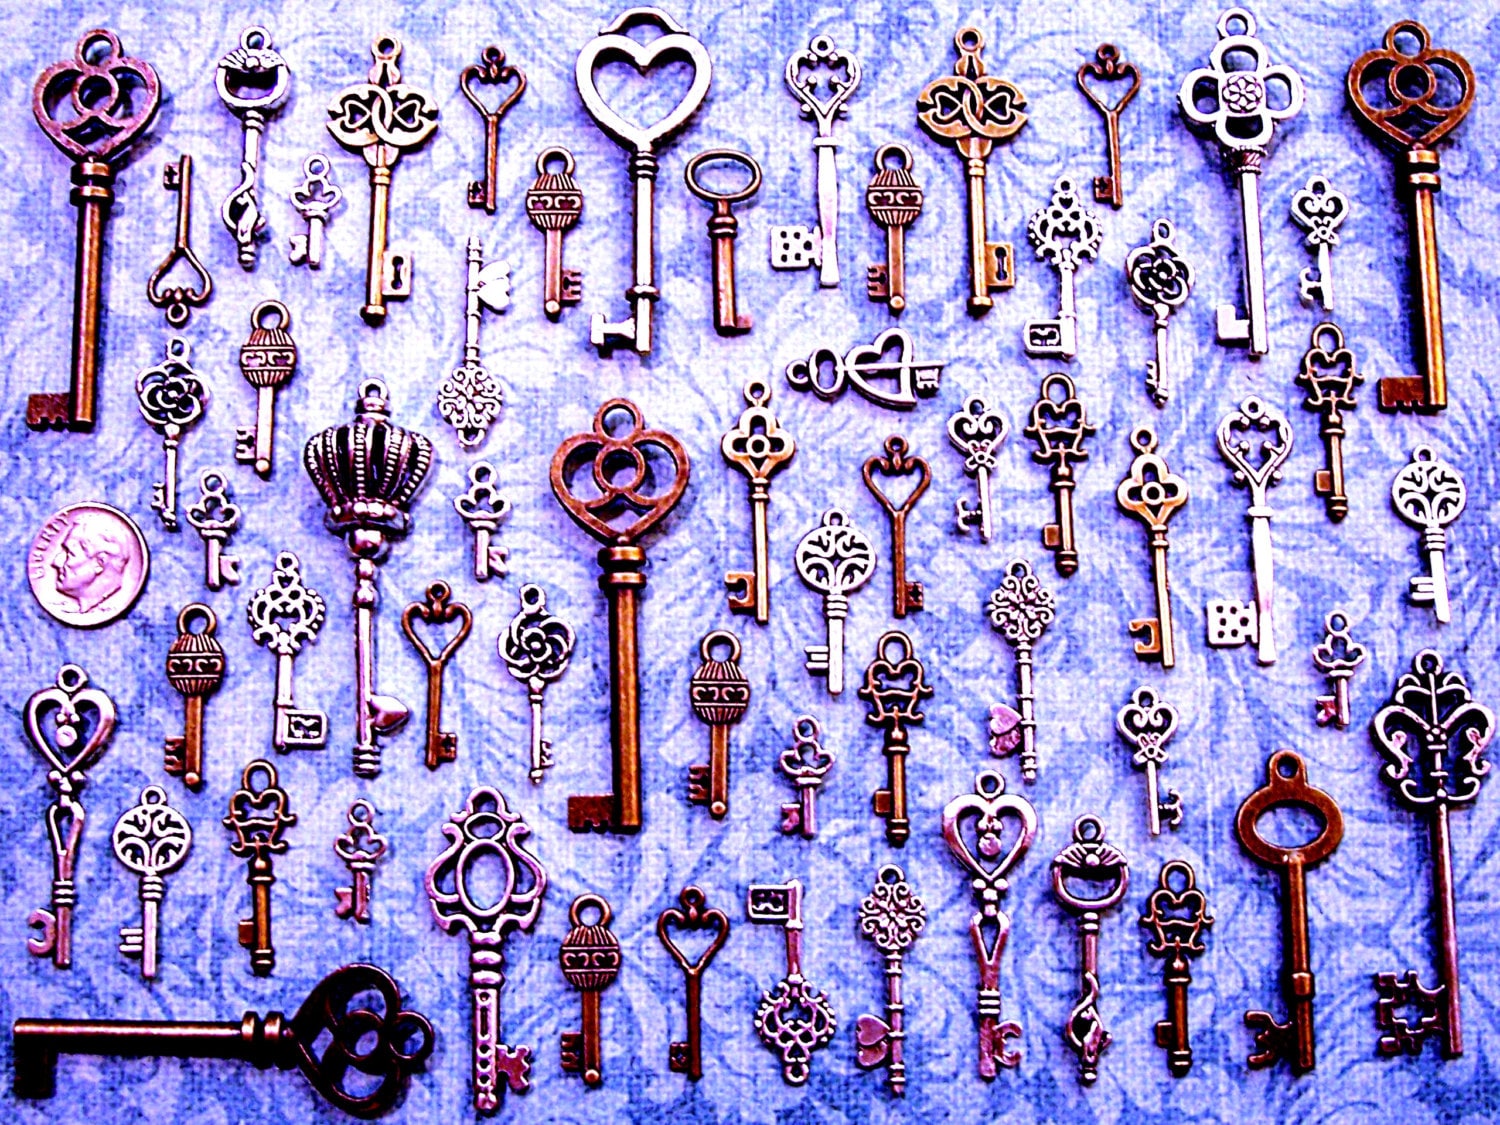 136 Bulk Lot Skeleton Keys Vintage Antique Look Replica Charm Jewelry Steampunk Wedding Bead Supplies Pendant  Collection Reproduction Craft